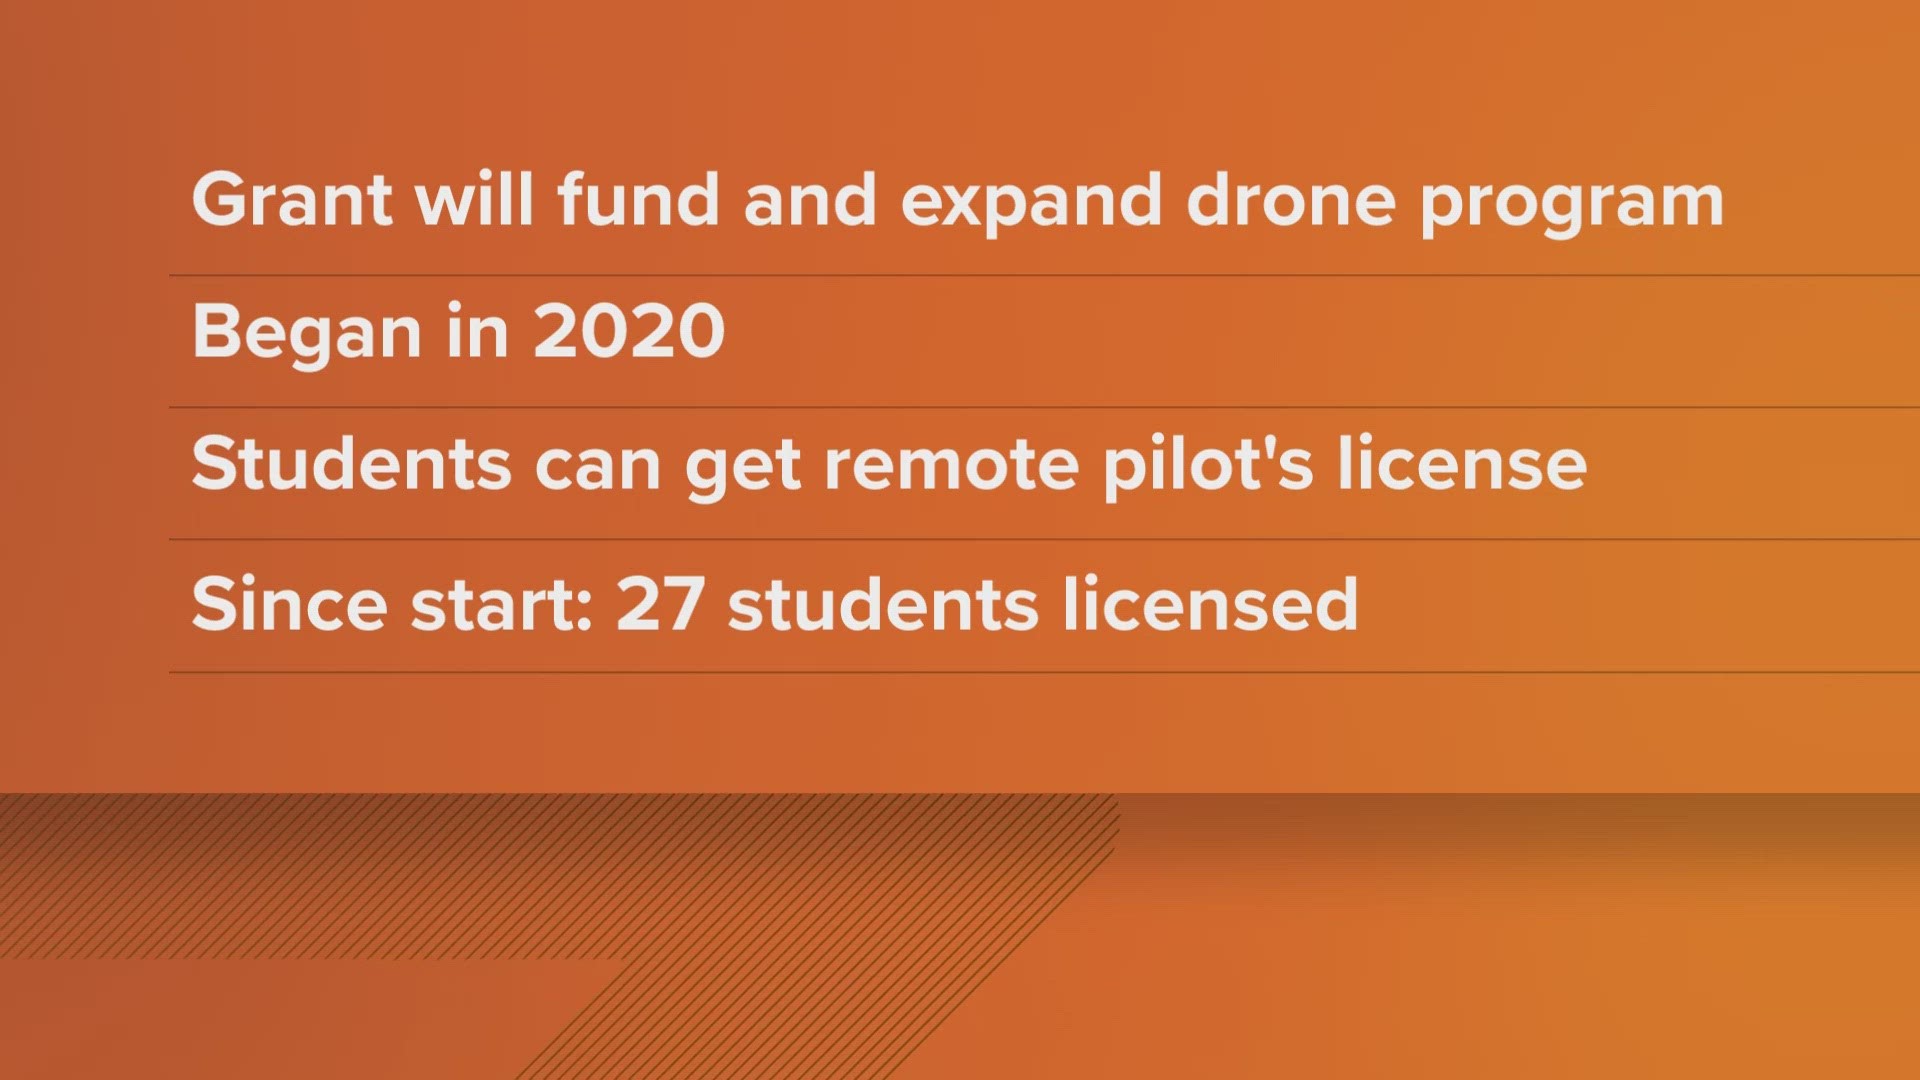 The district is receiving grant funding from the Department of Transportation and the Federal Aviation Administration to fund the program.